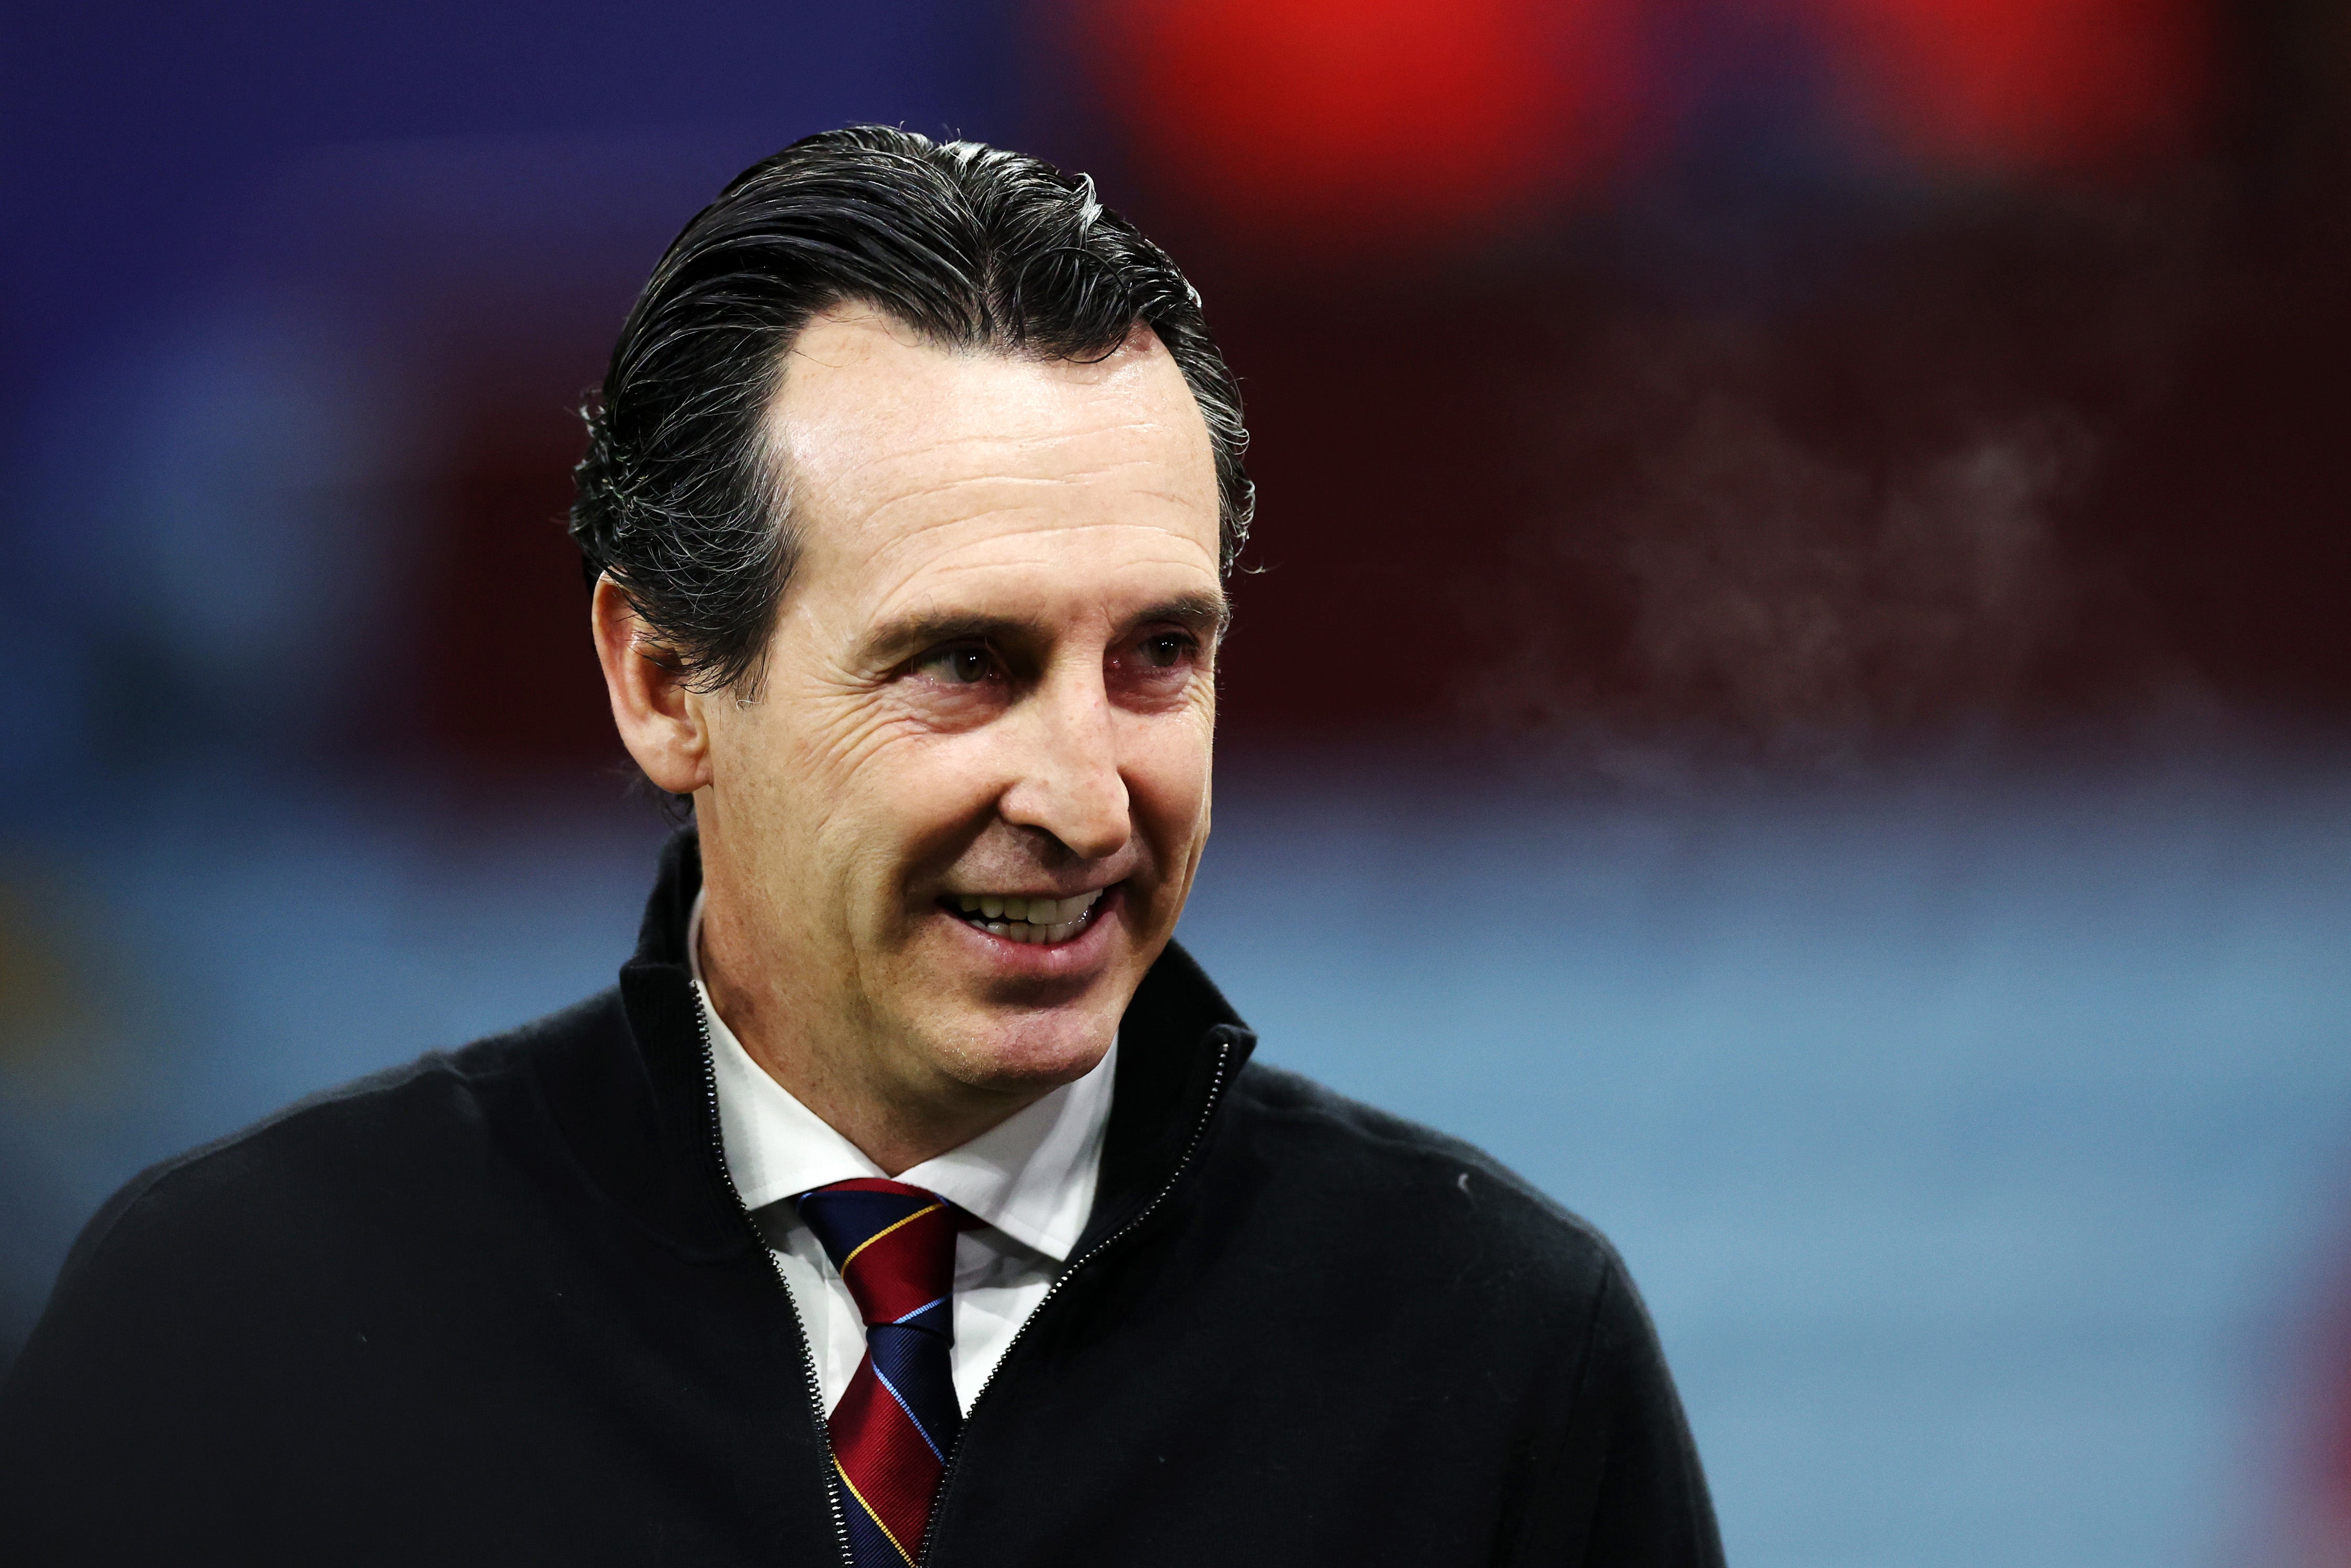 Unai Emery’s Aston Villa have won 14 Premier League games in a row at home – including Wednesday’s victory over champions Man City